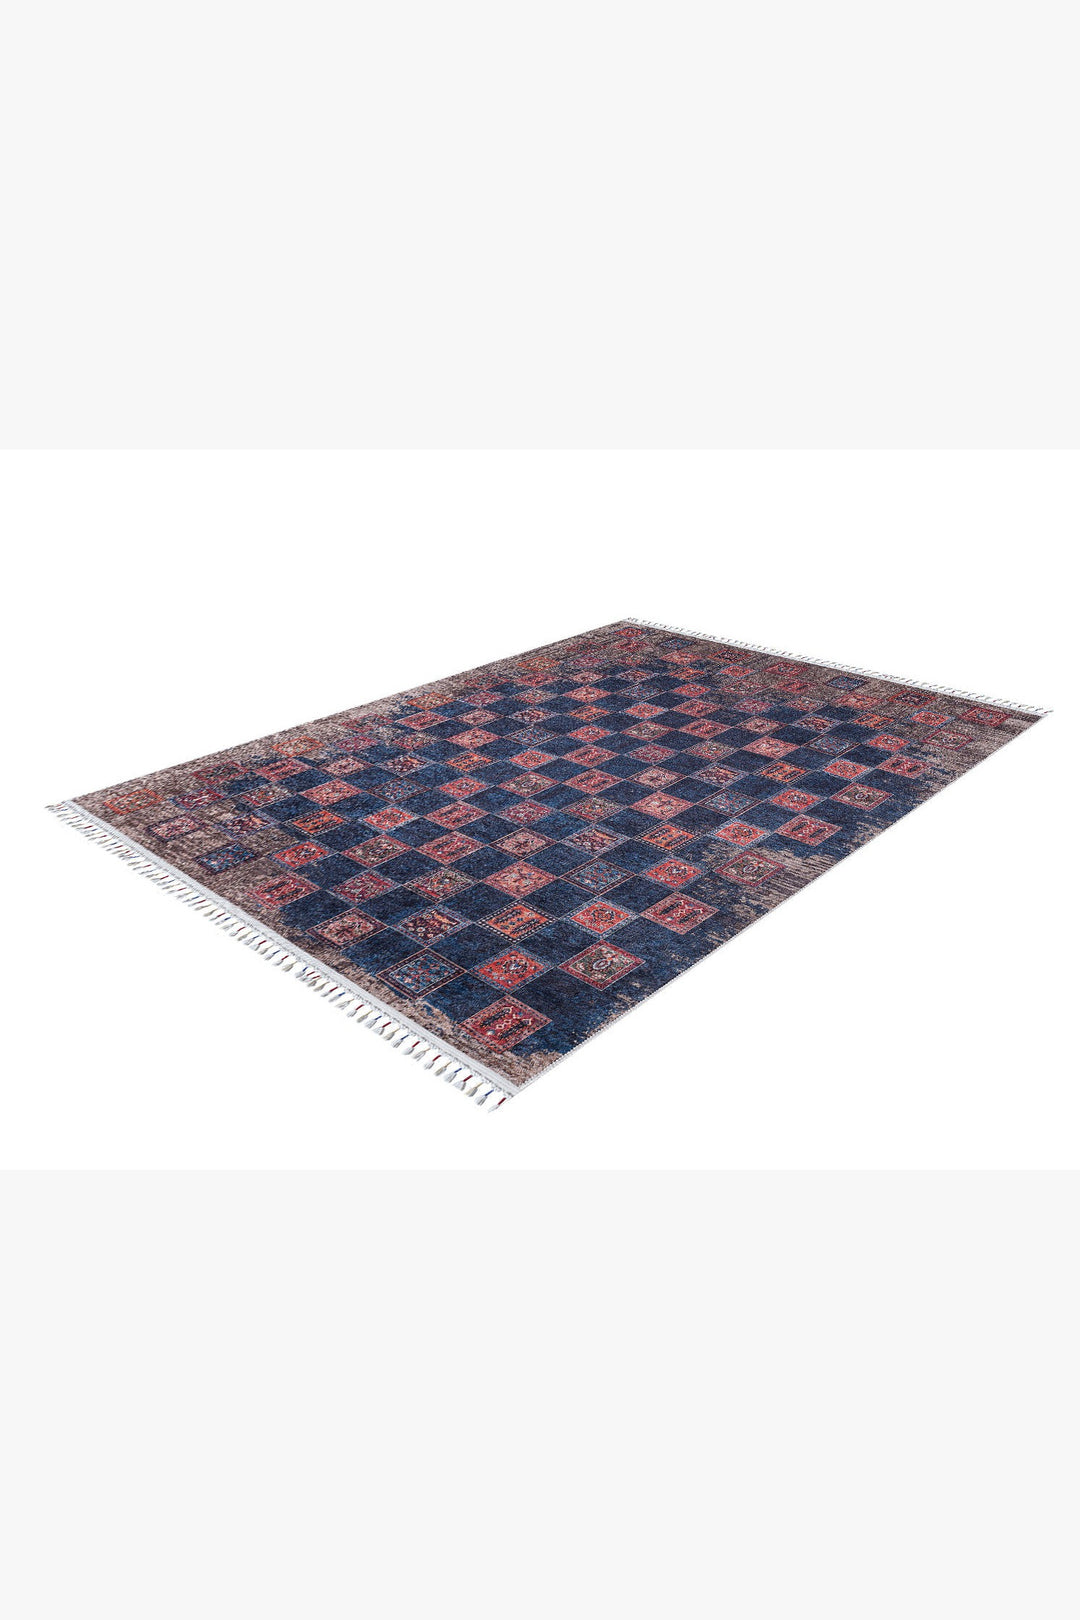 machine-washable-area-rug-Braided-Tassel-Collection-Blue-Red-JR5025